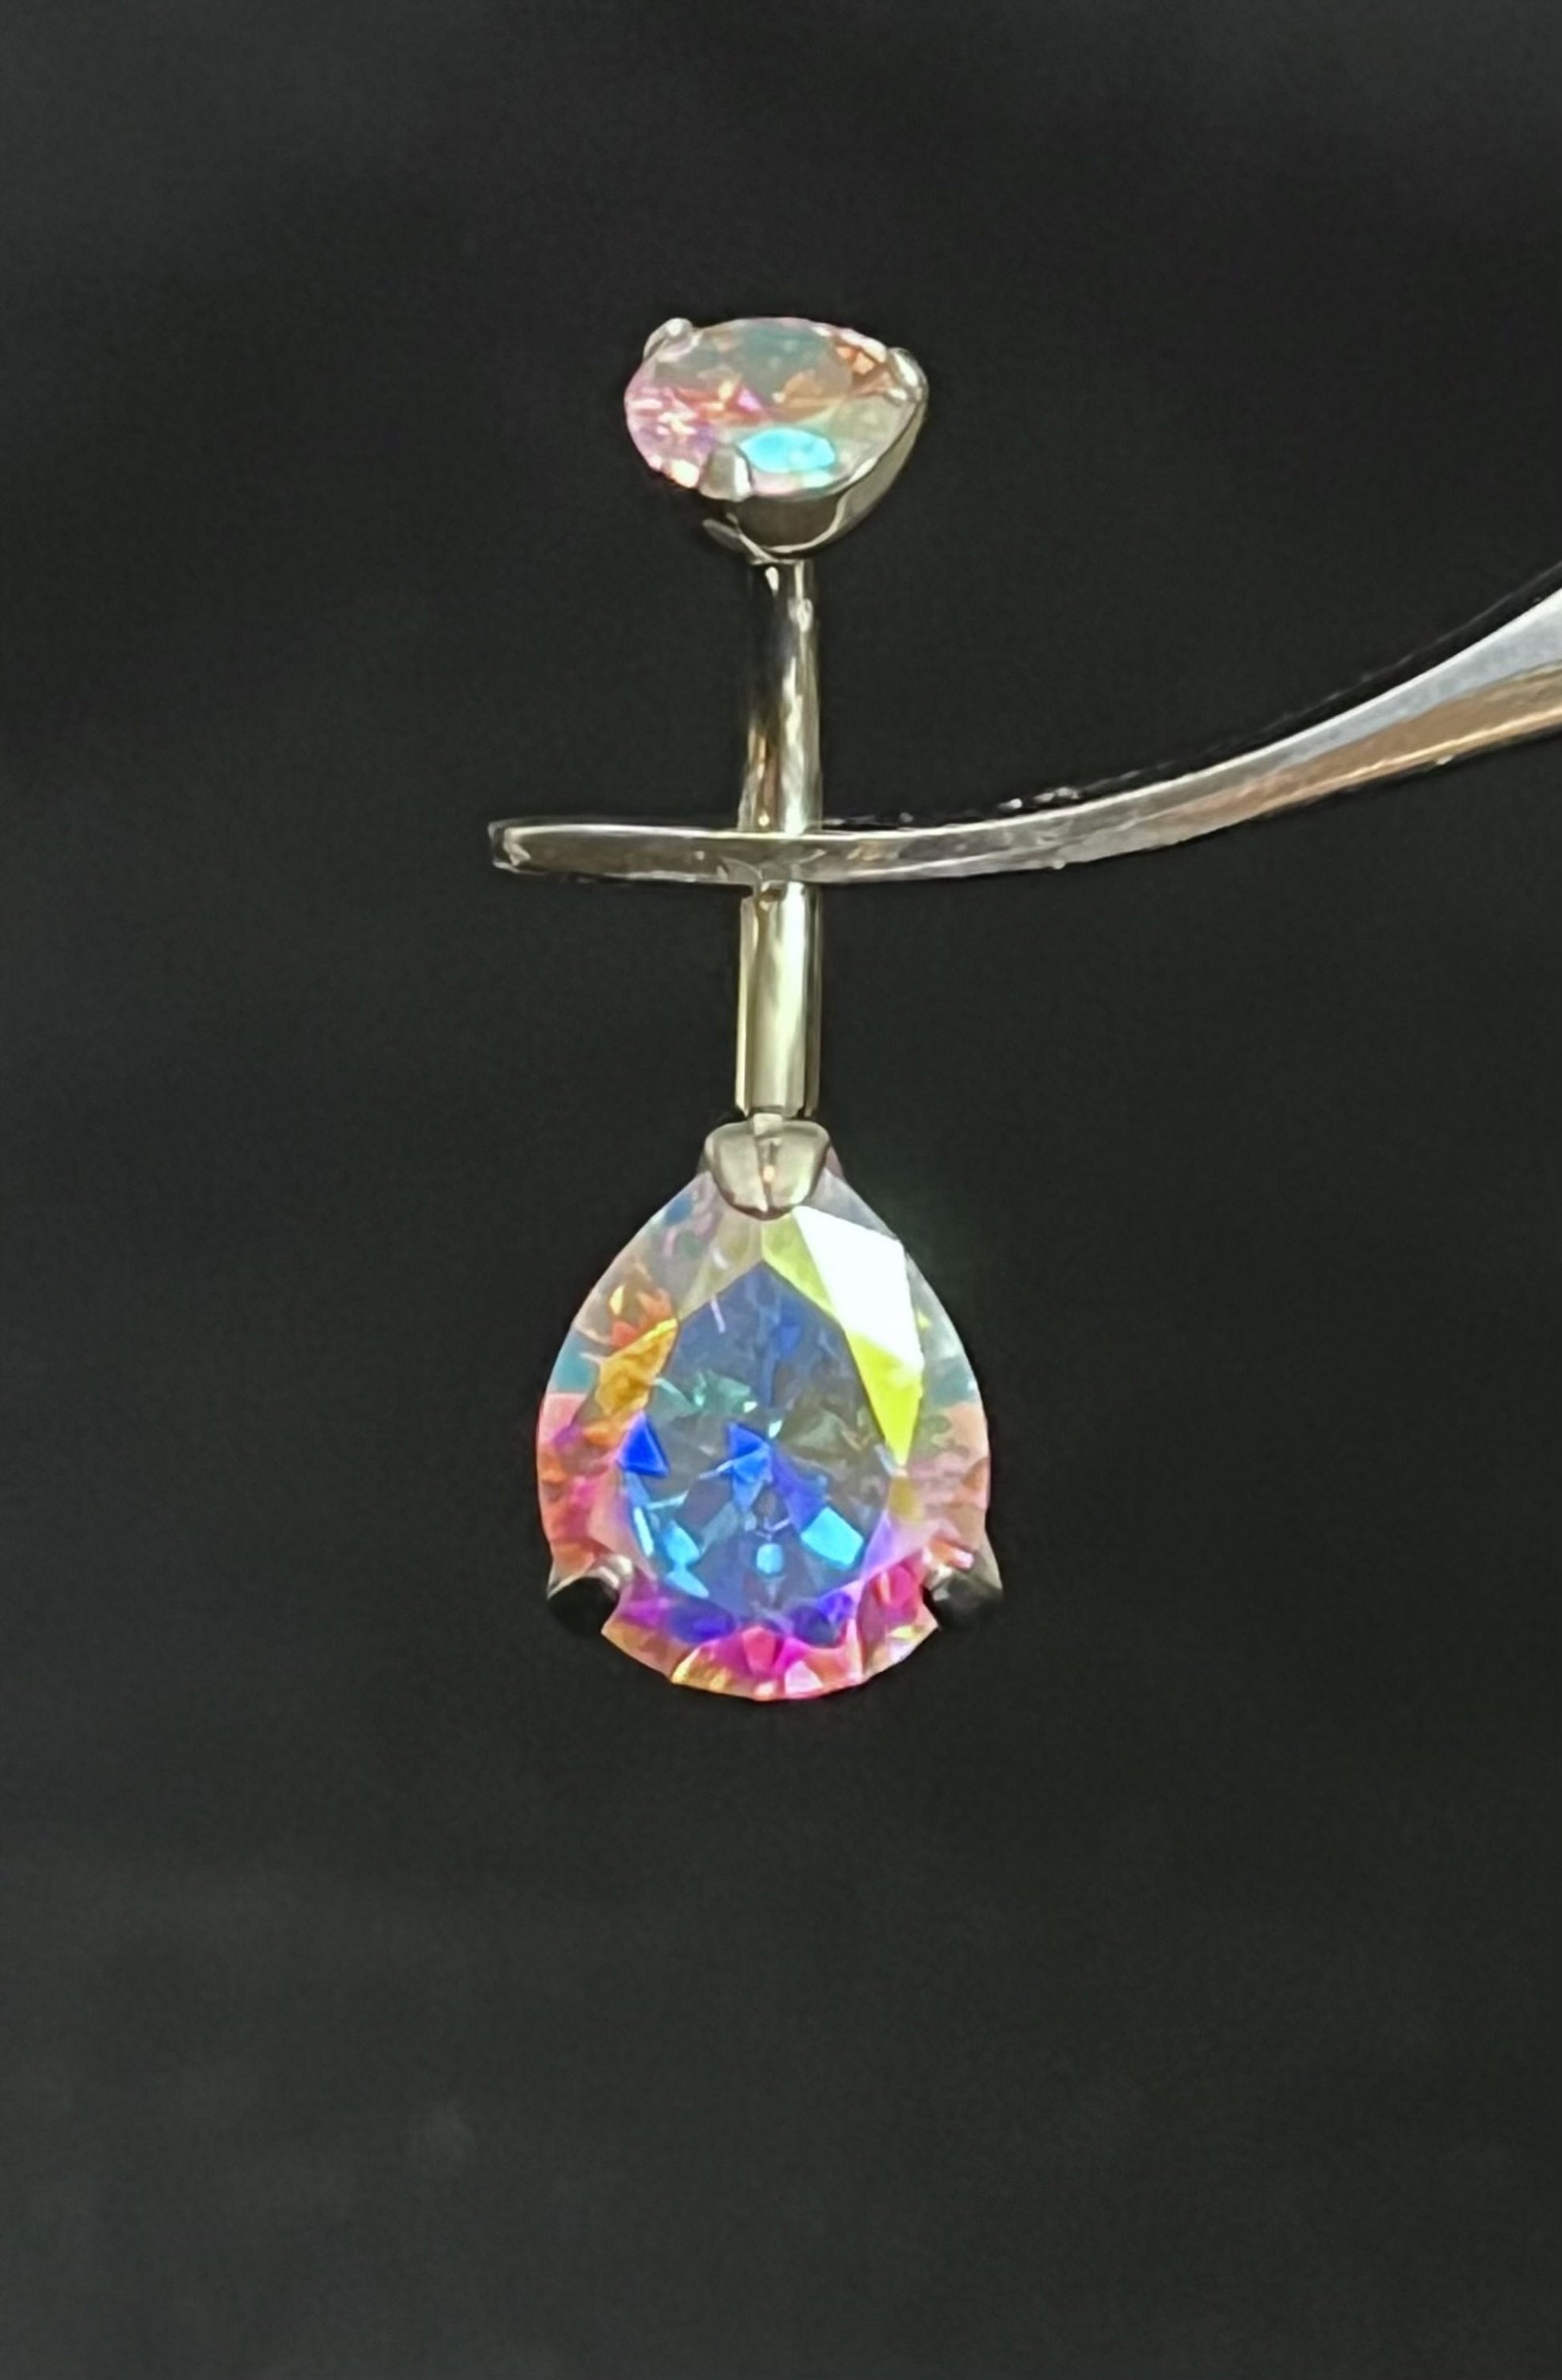 1 Piece Solid Implant Grade Titanium Teardrop Gem Internally Threaded Navel/Naval Belly Ring - 14g - Available in a Variety of Colors!